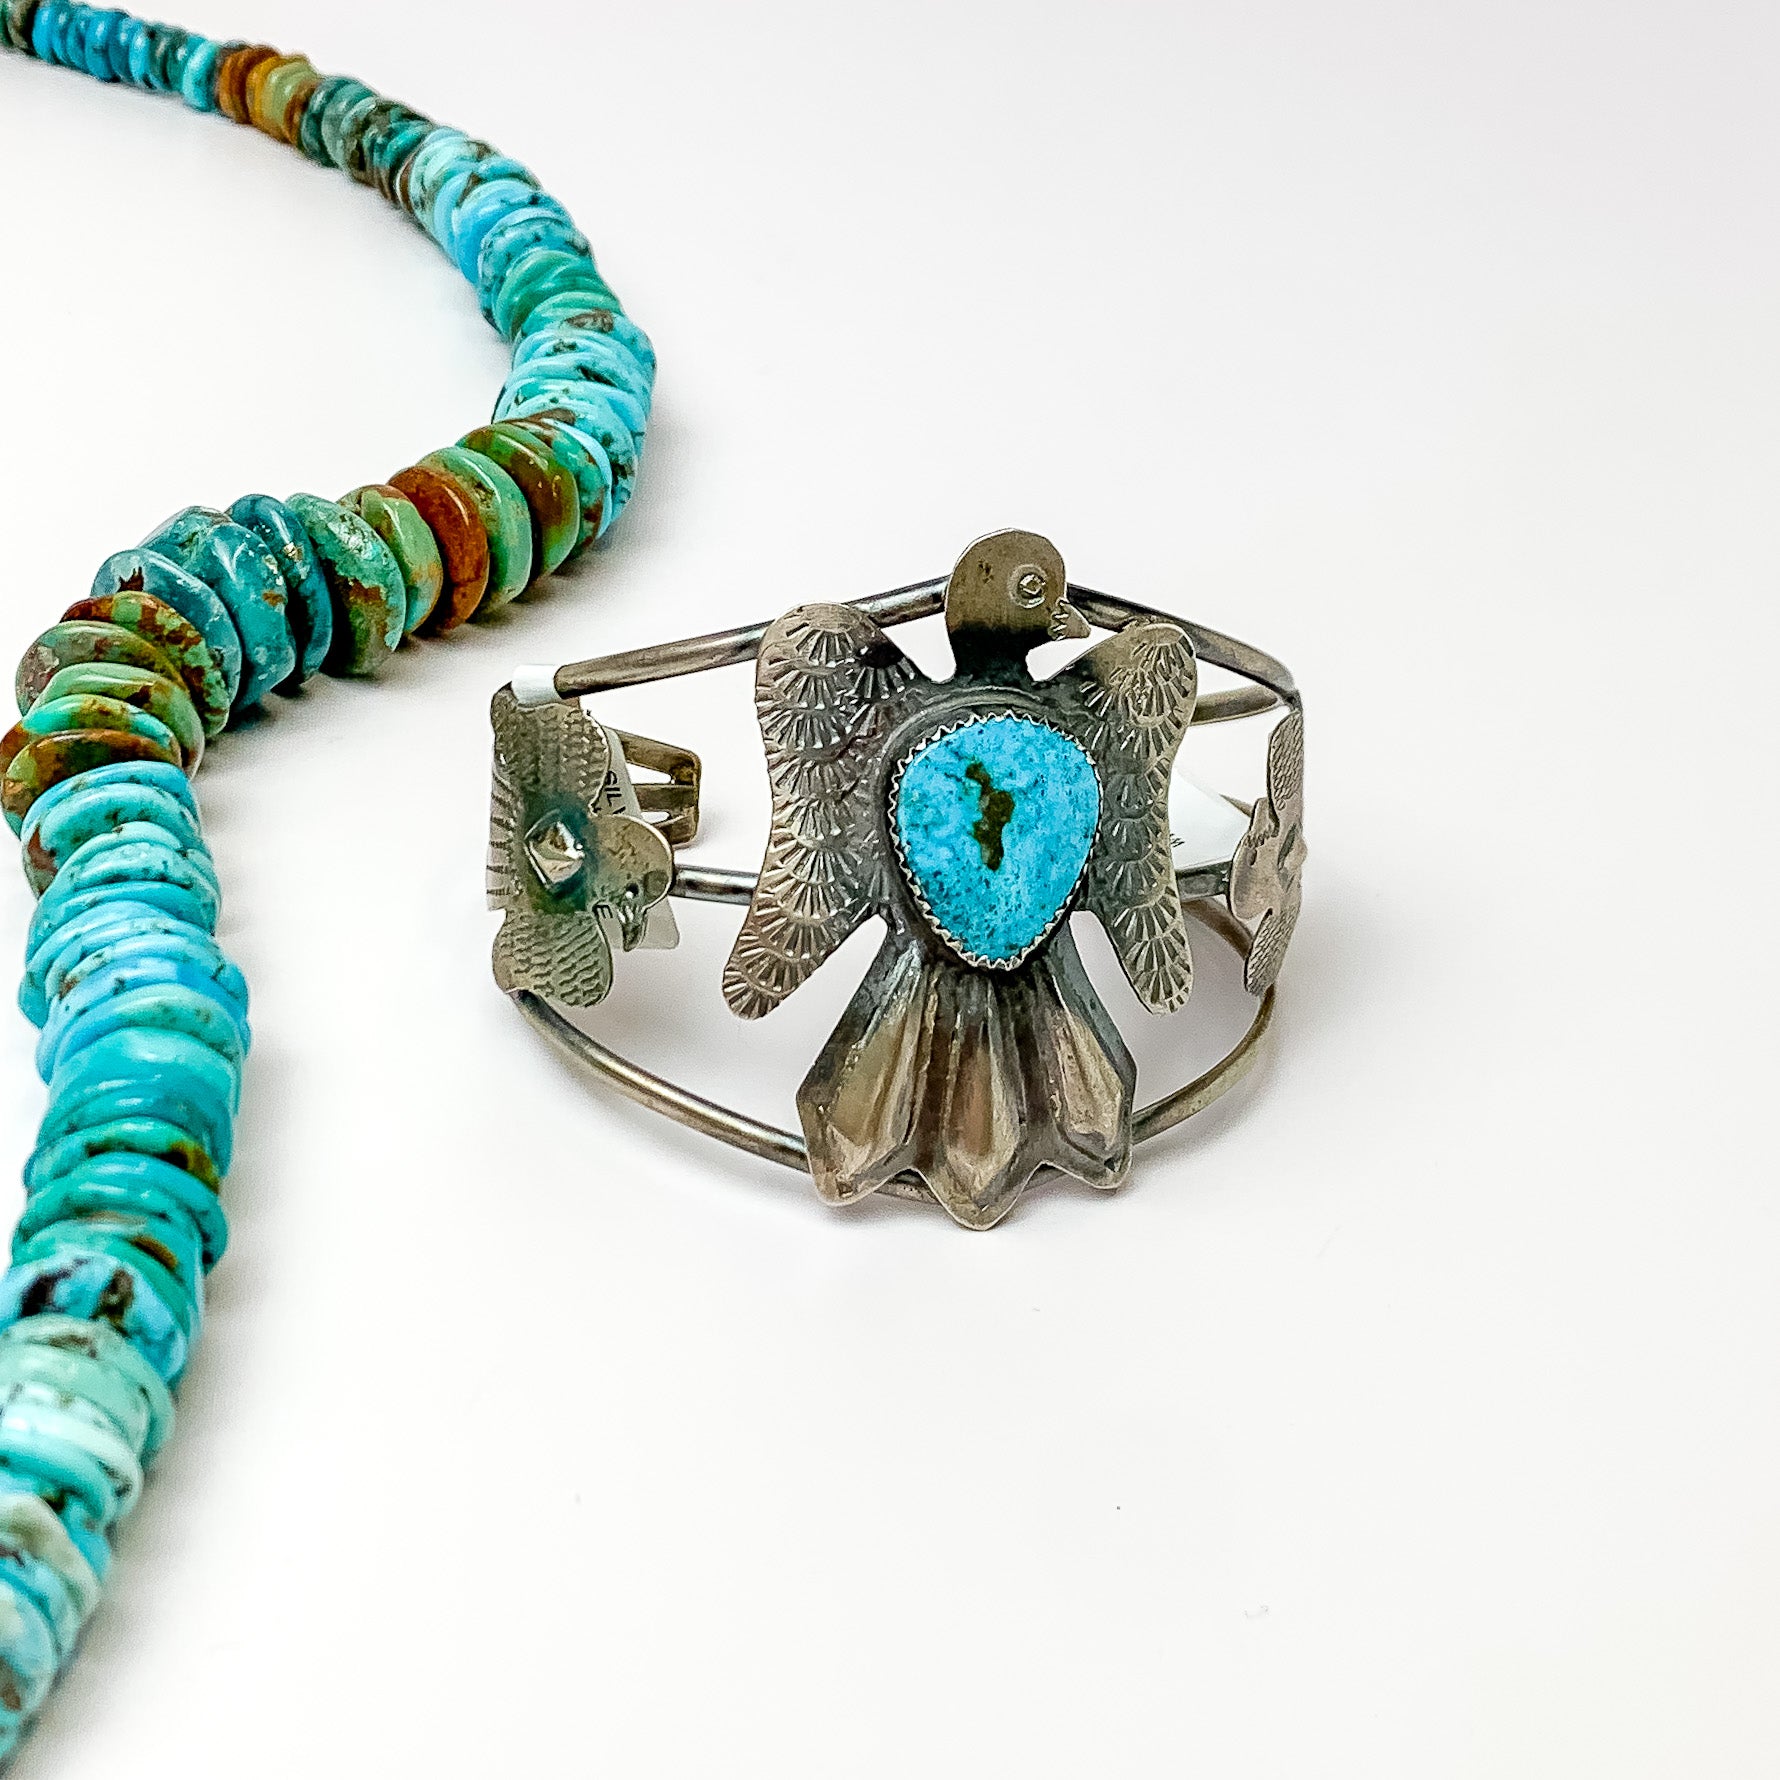 tim yazzie thunderbird sterling silver cuff bracelet with 3 birds topped with turquoise stone zuni navajo nations native american indian handmade handcrafted heritage style turquoise and co